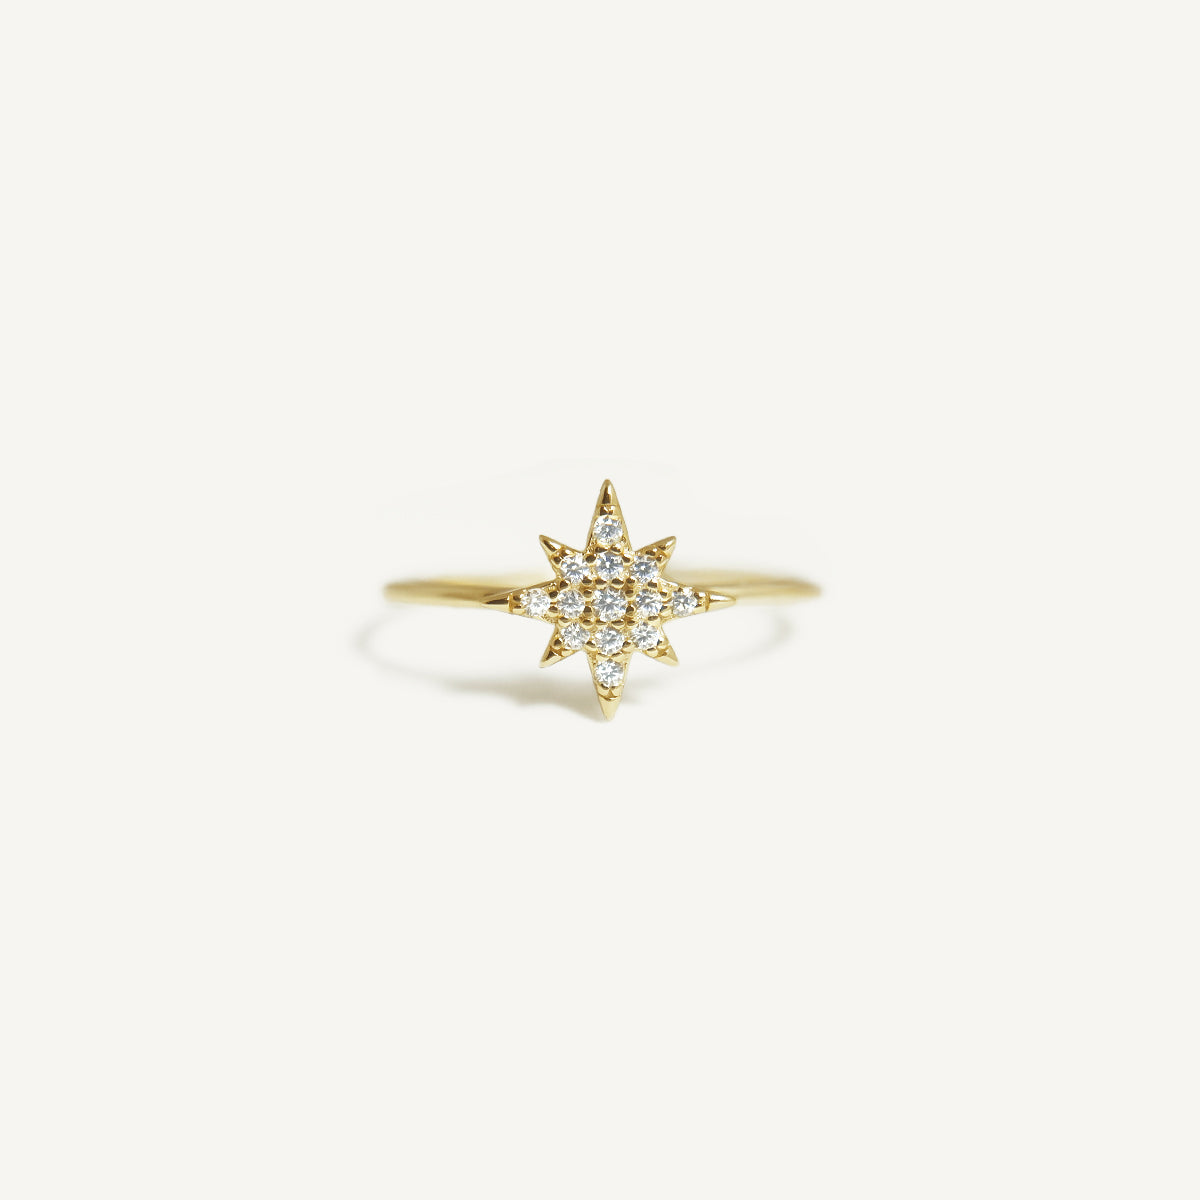 The Pave 8 Star Ring